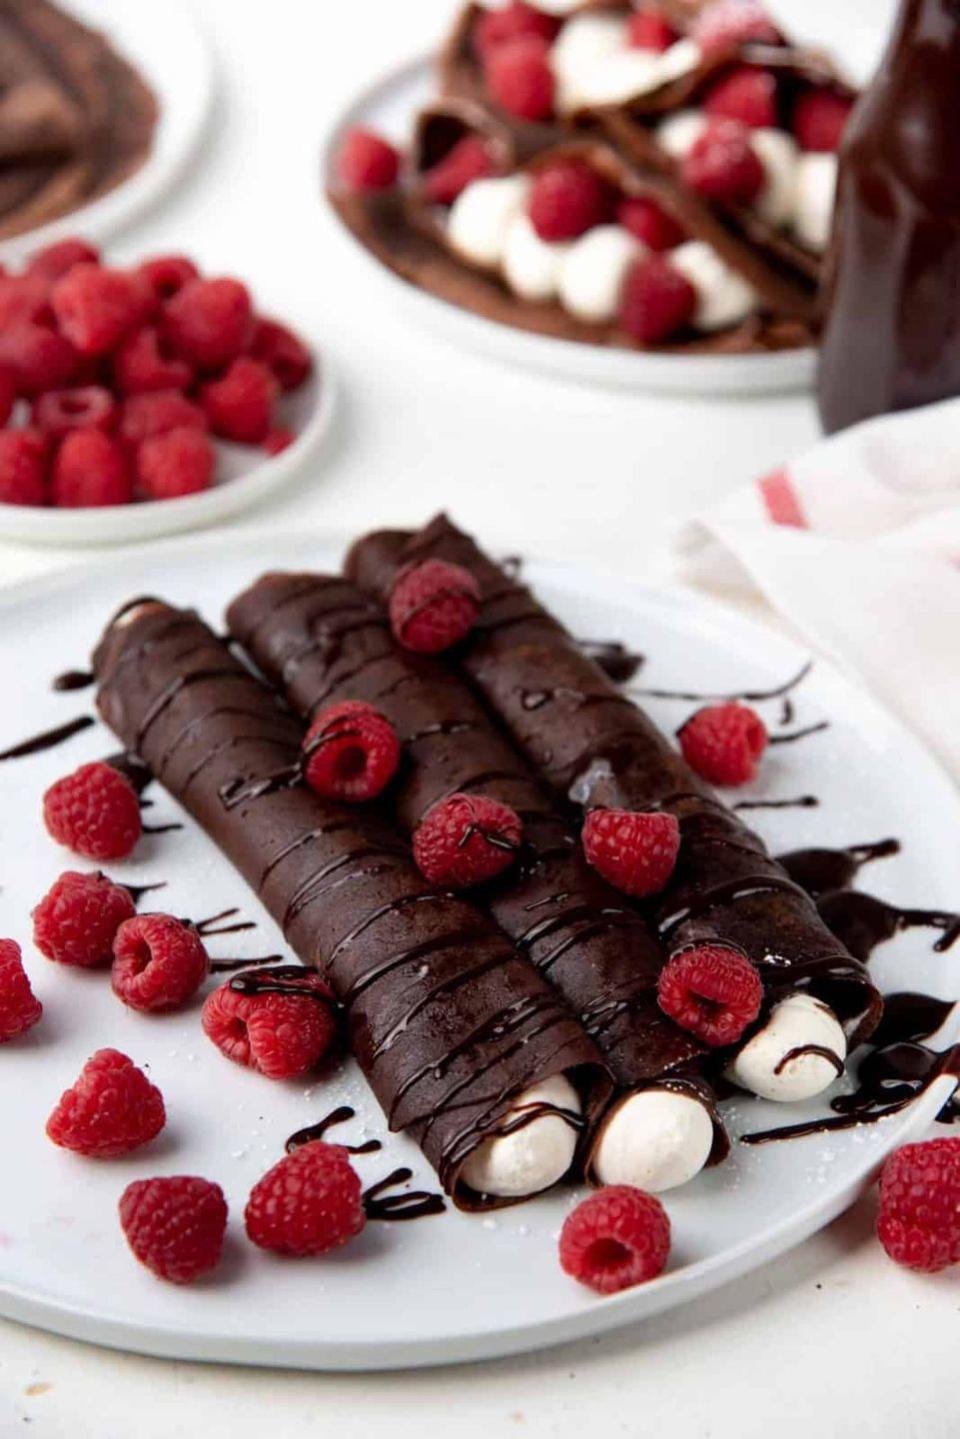 breakfast in bed perfect chocolate crepes with raspberries